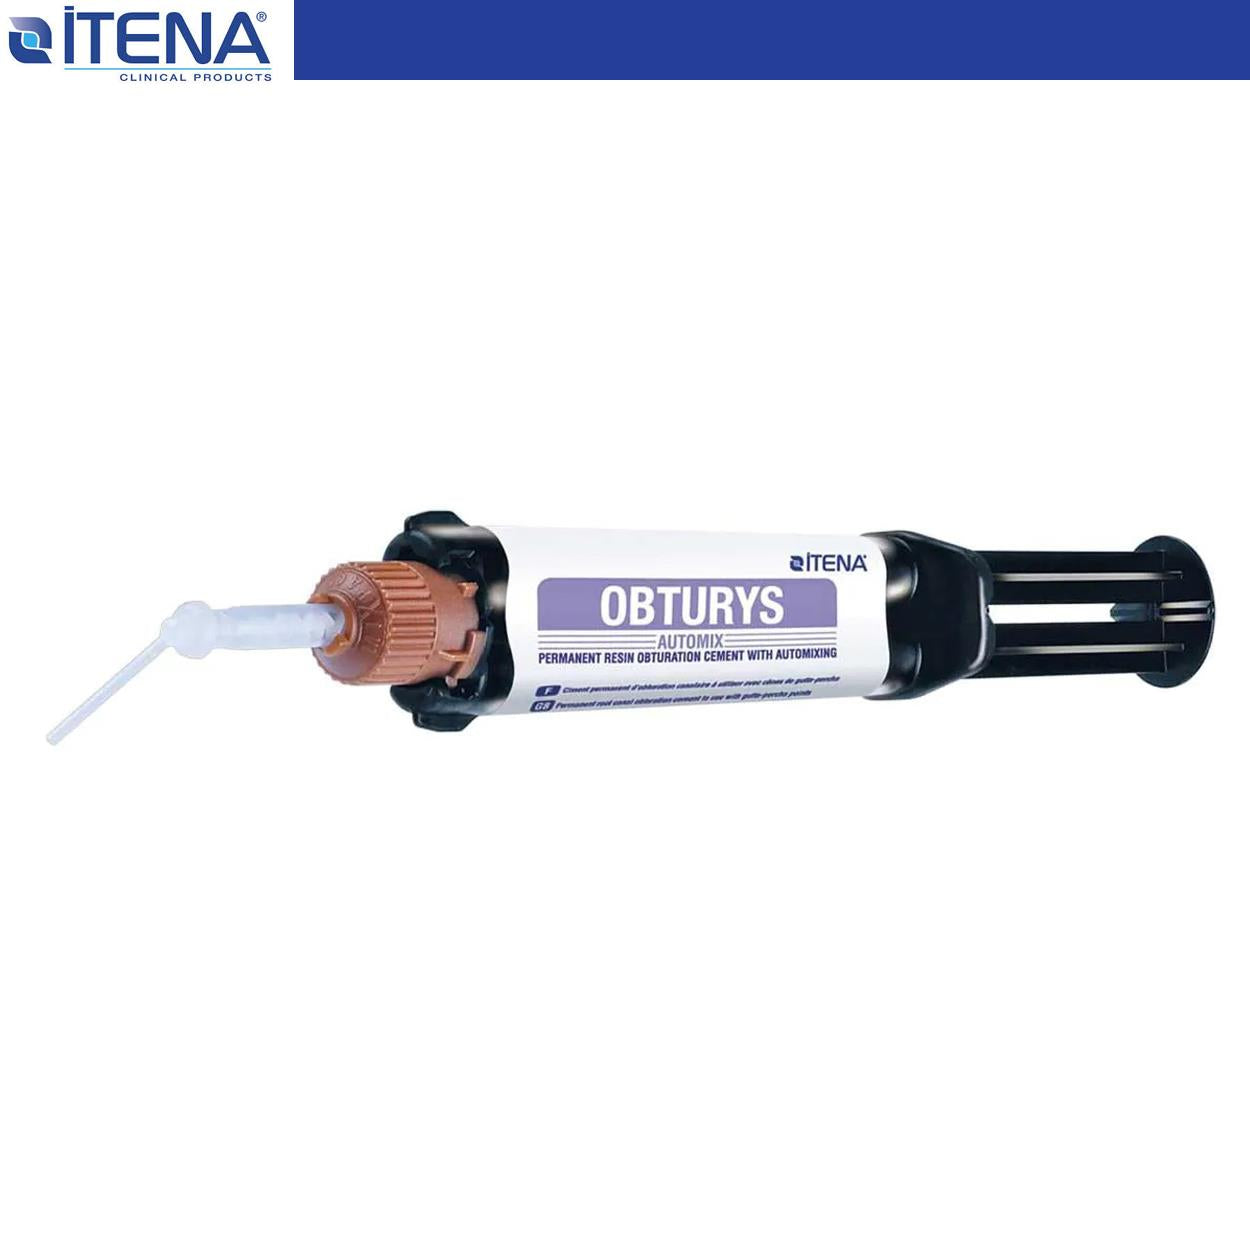 DentrealStore - Itena Obturys Automix Permanent root canal sealer, epoxy-amine based